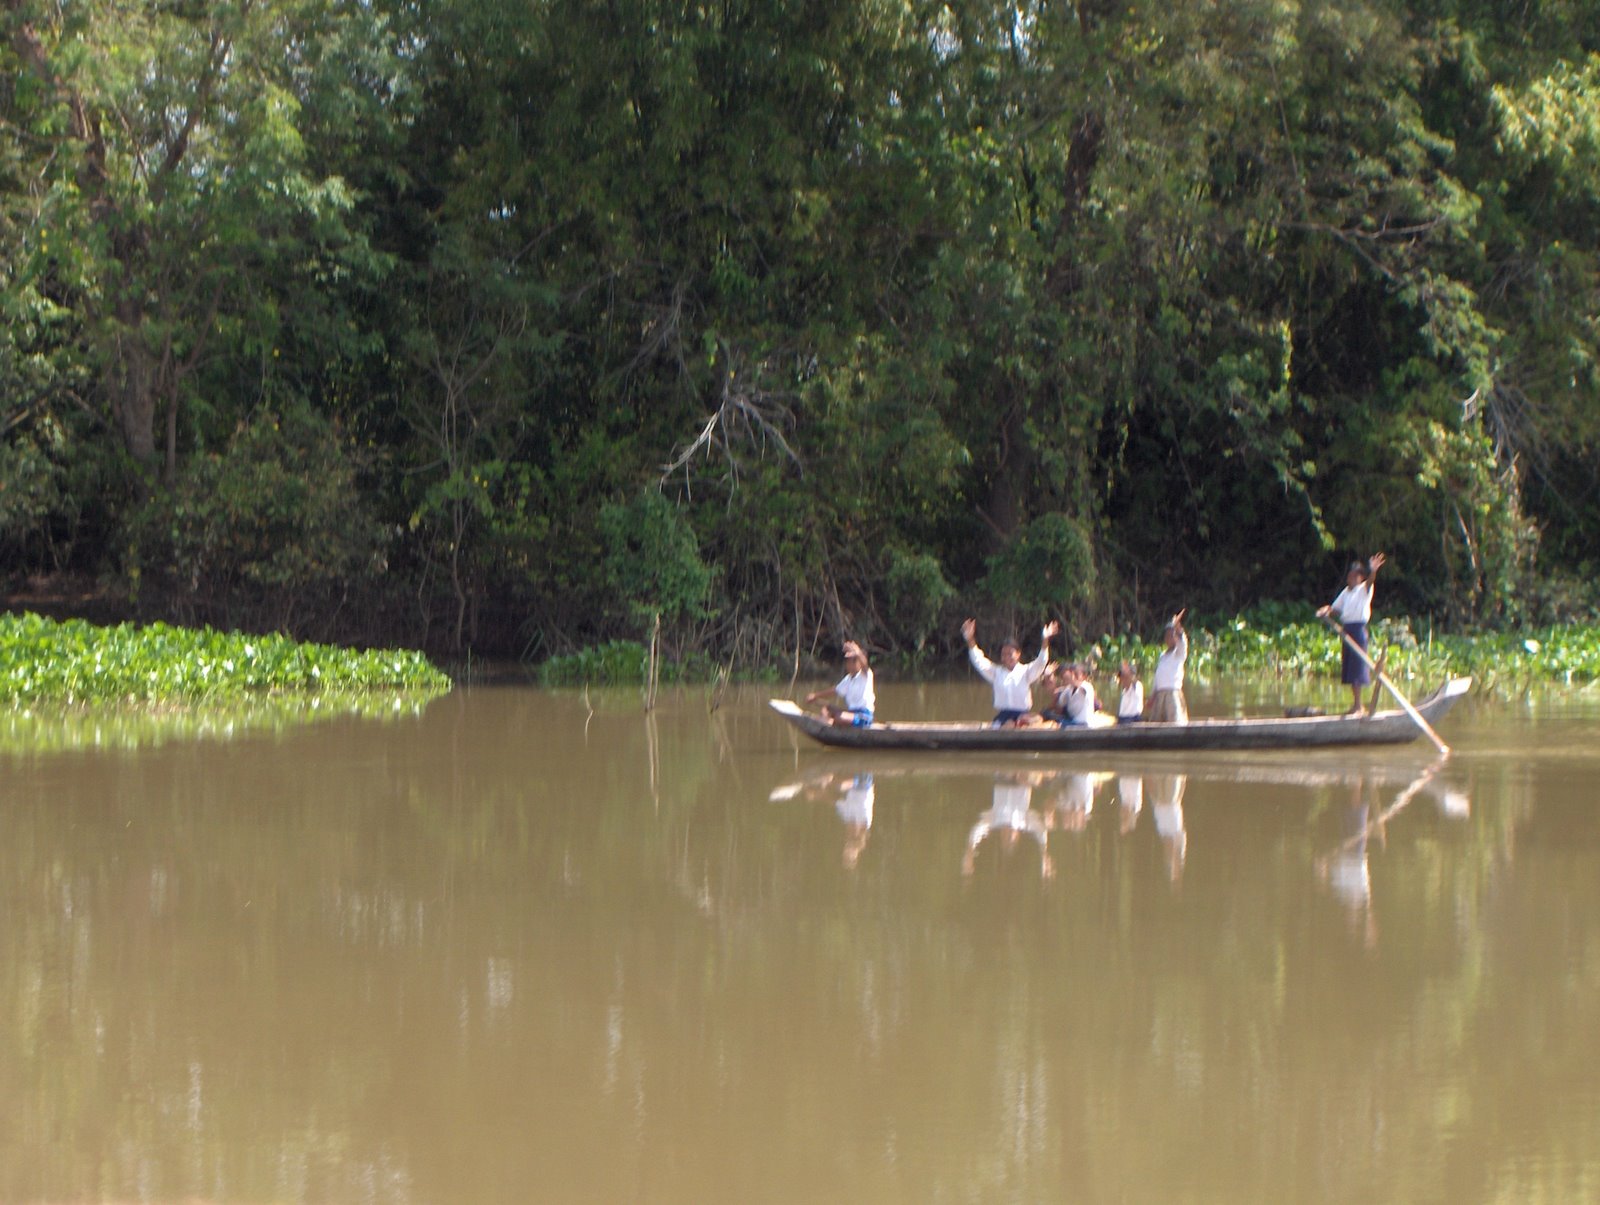 [Schoolkids+waving+at+tourist+boat+on+Tonle+Sap+river.JPG]